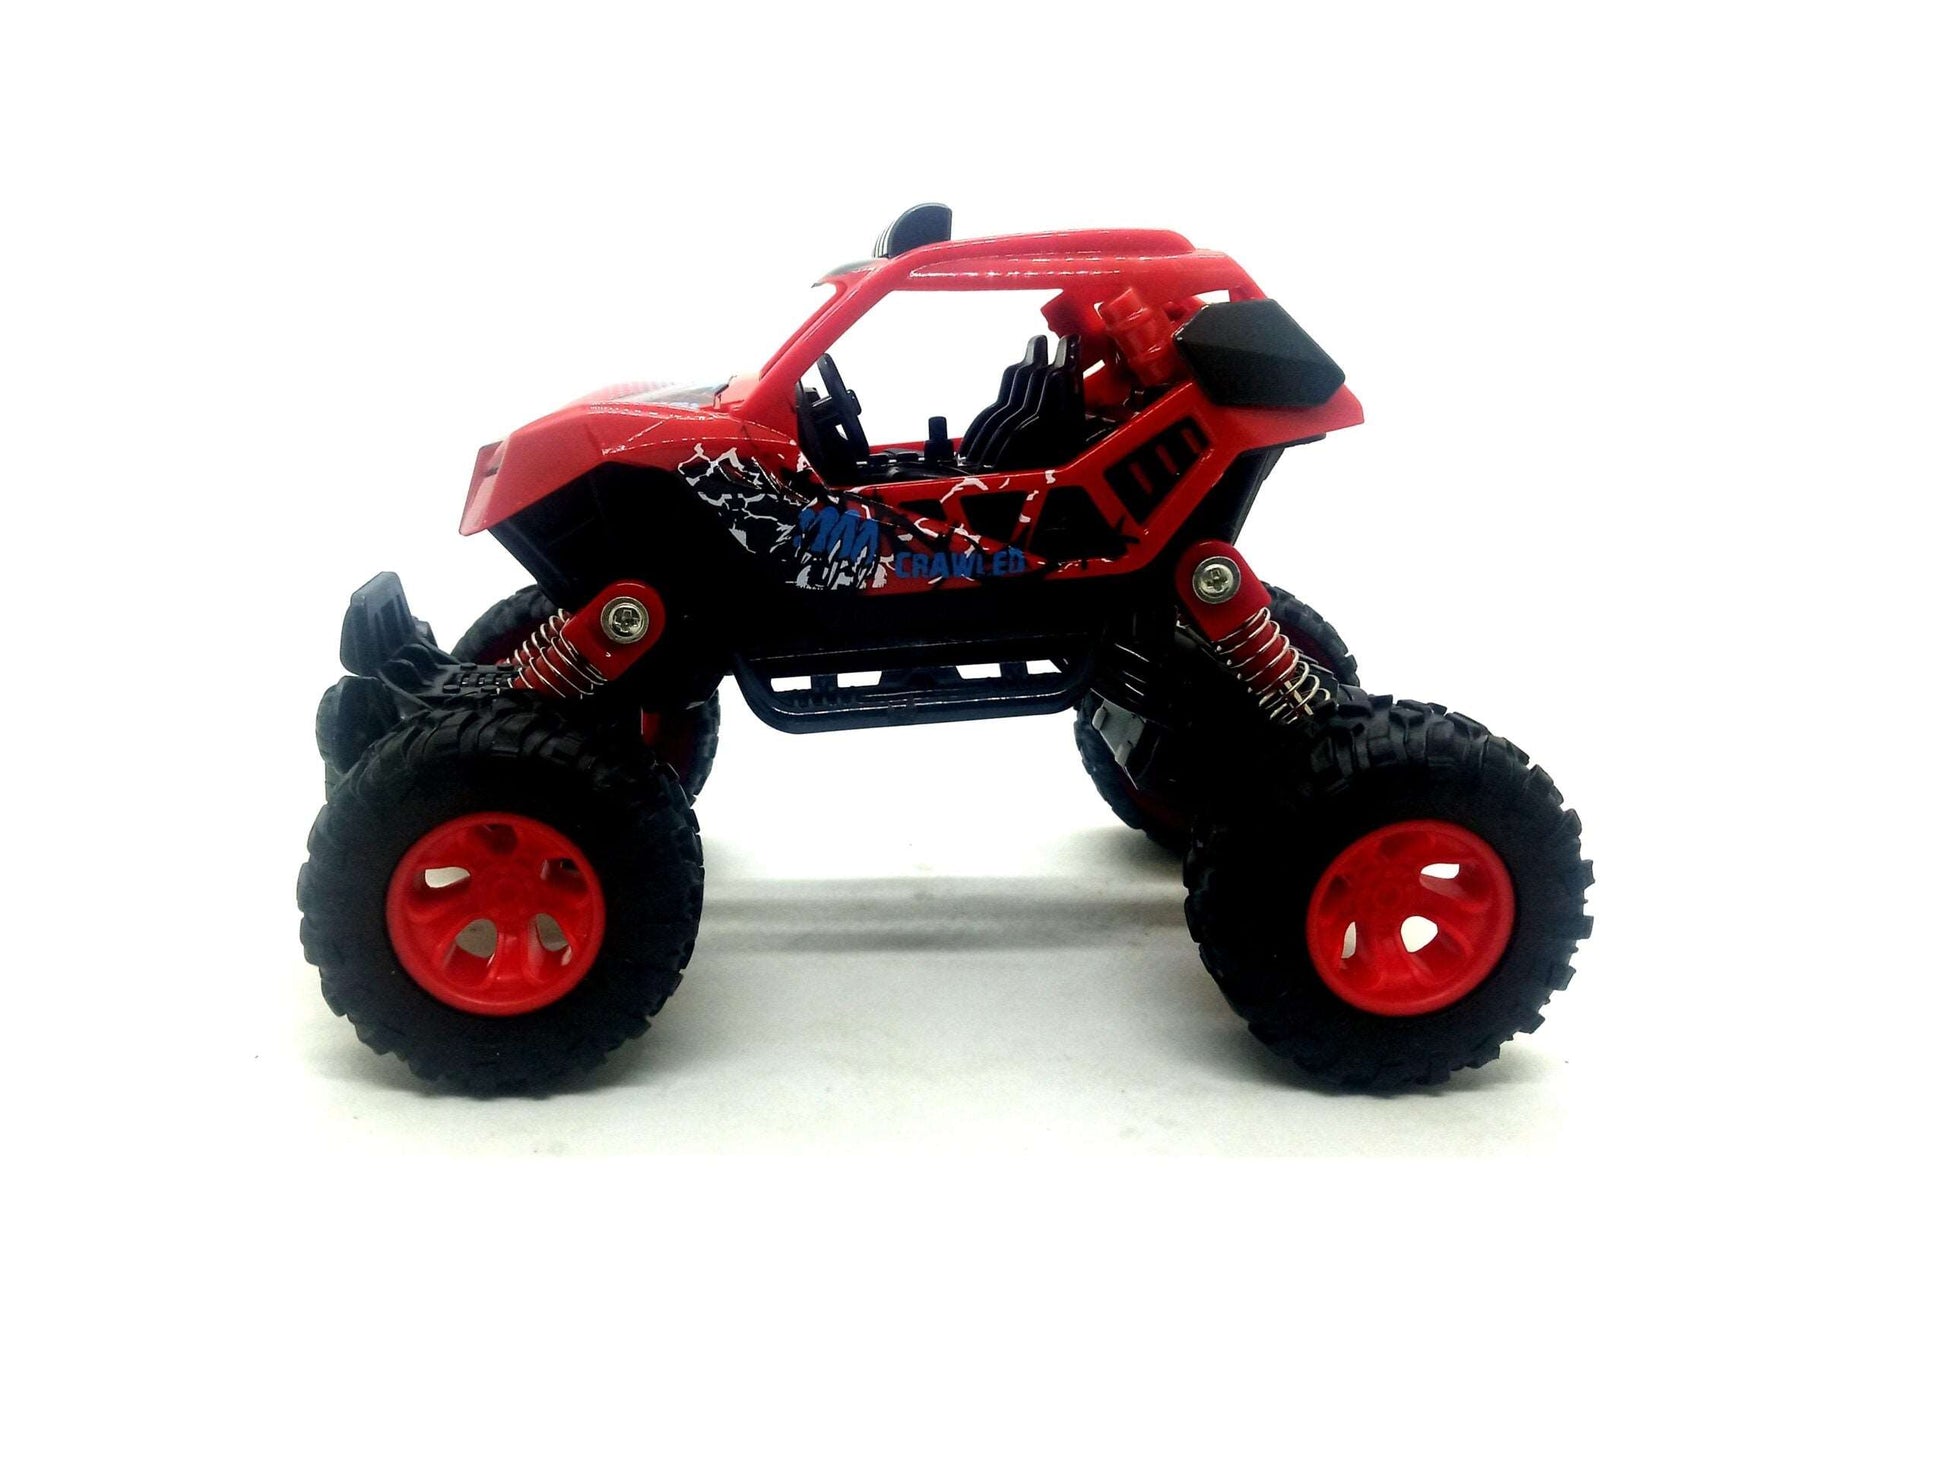 Amazing Graphic Printed Rock Crawler 2.0 Four Way Pull back Metal Die-cast High Speed Long Distance Drive Friction Powered Off-Road 4 Wheel Car Toy